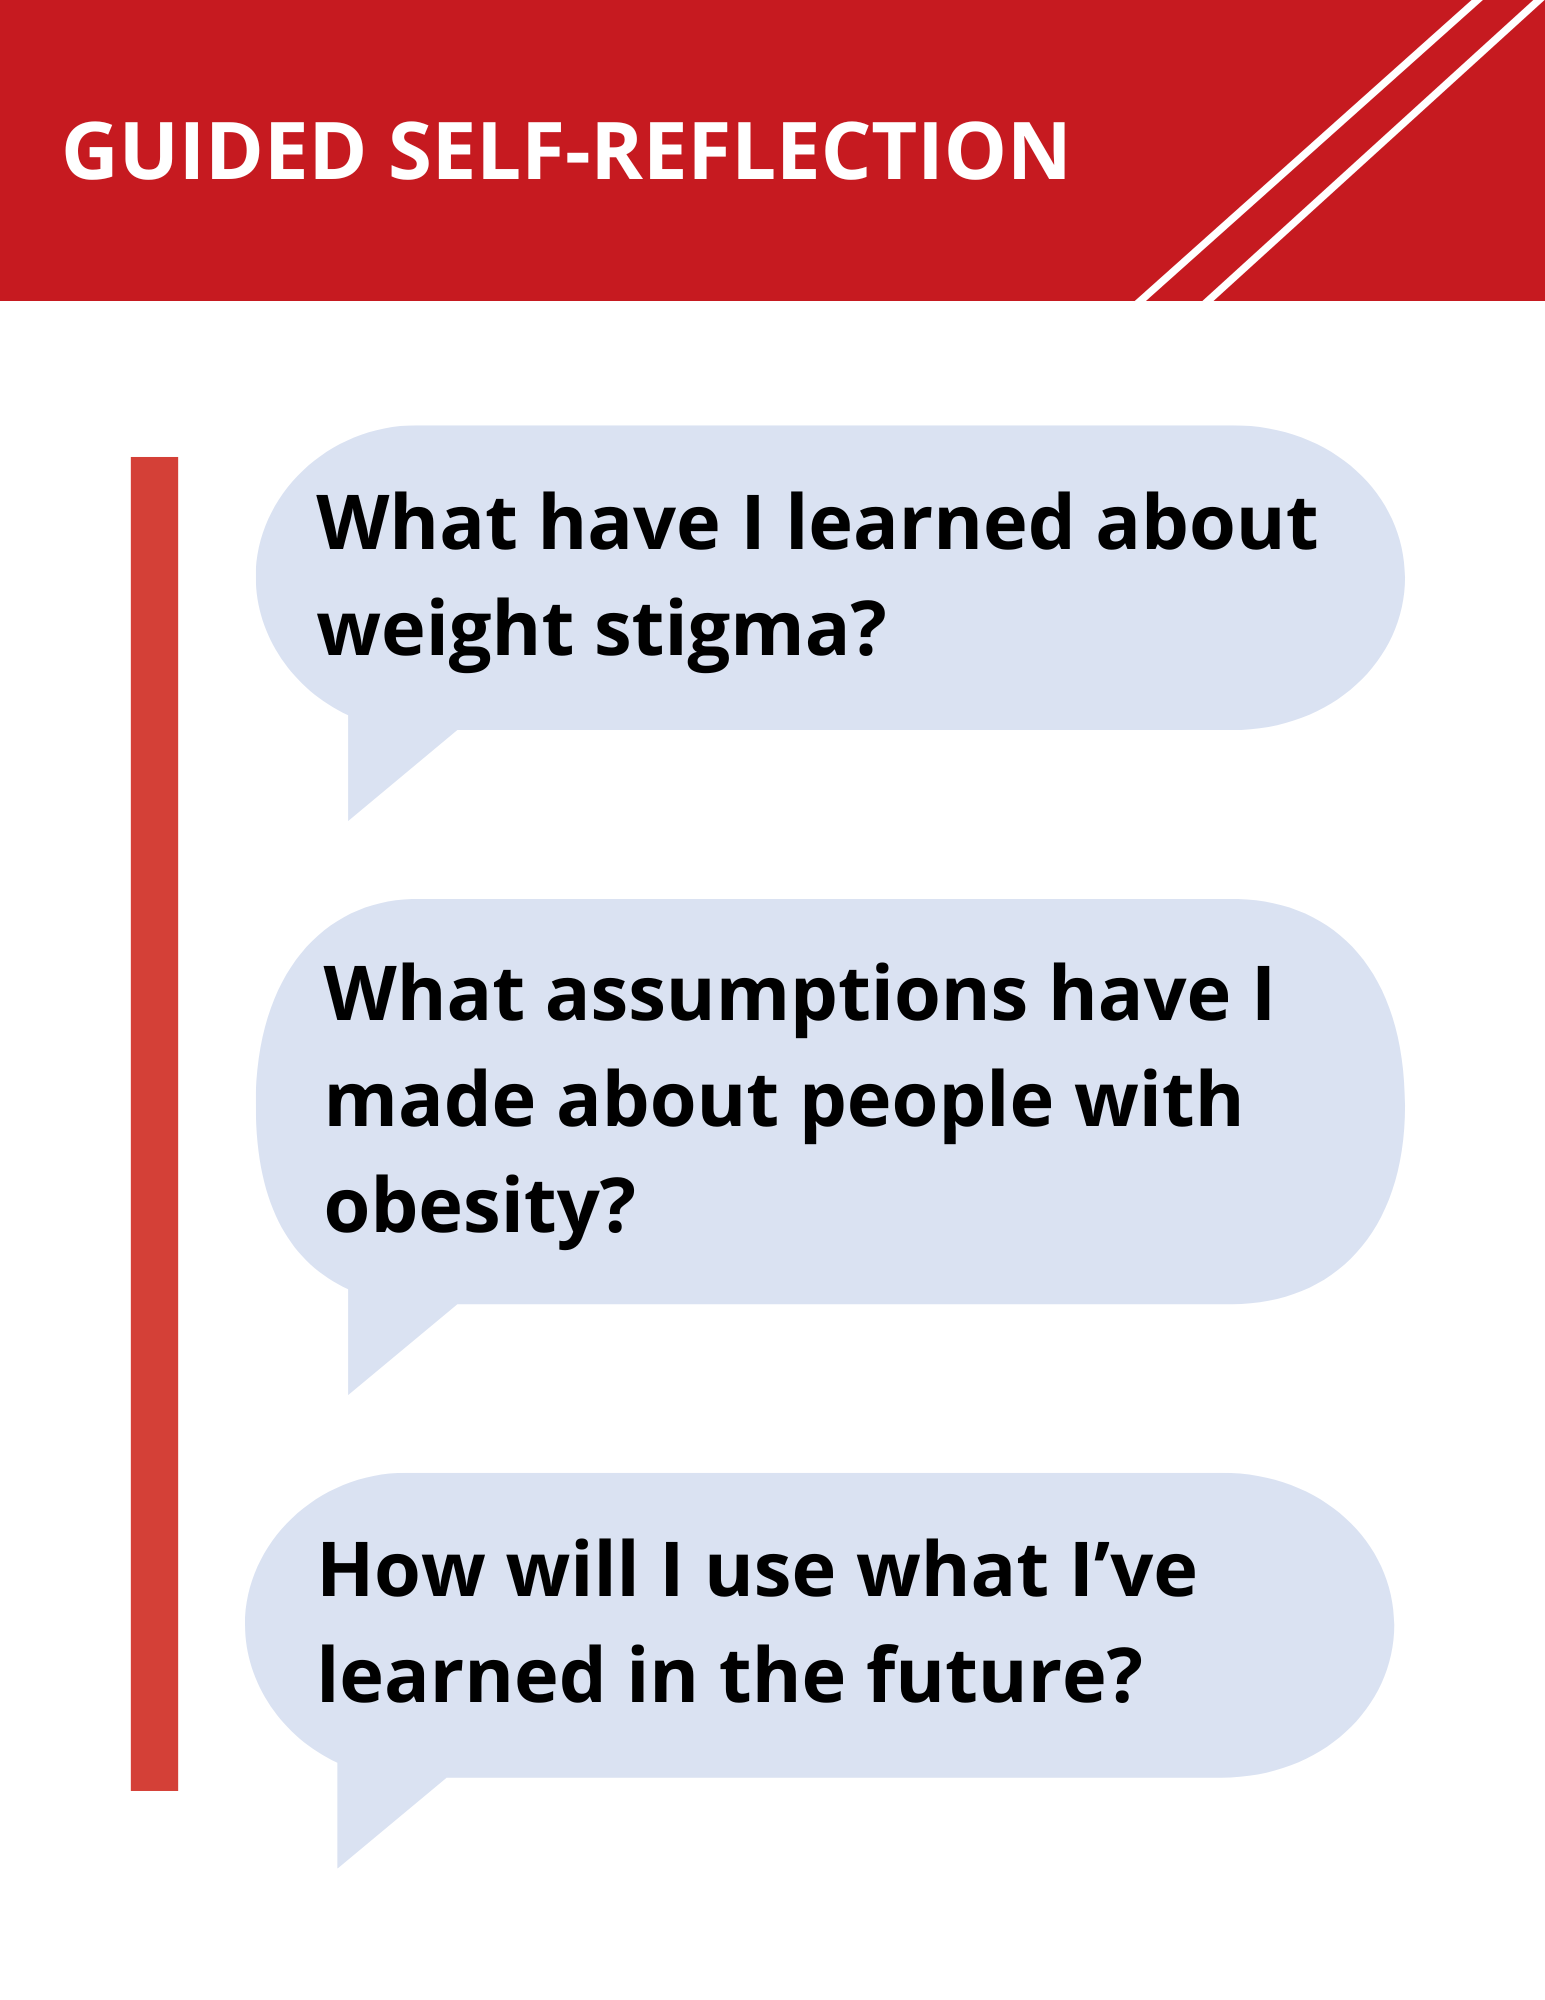 Guided self-reflection about why we make assumptions about people with obesity